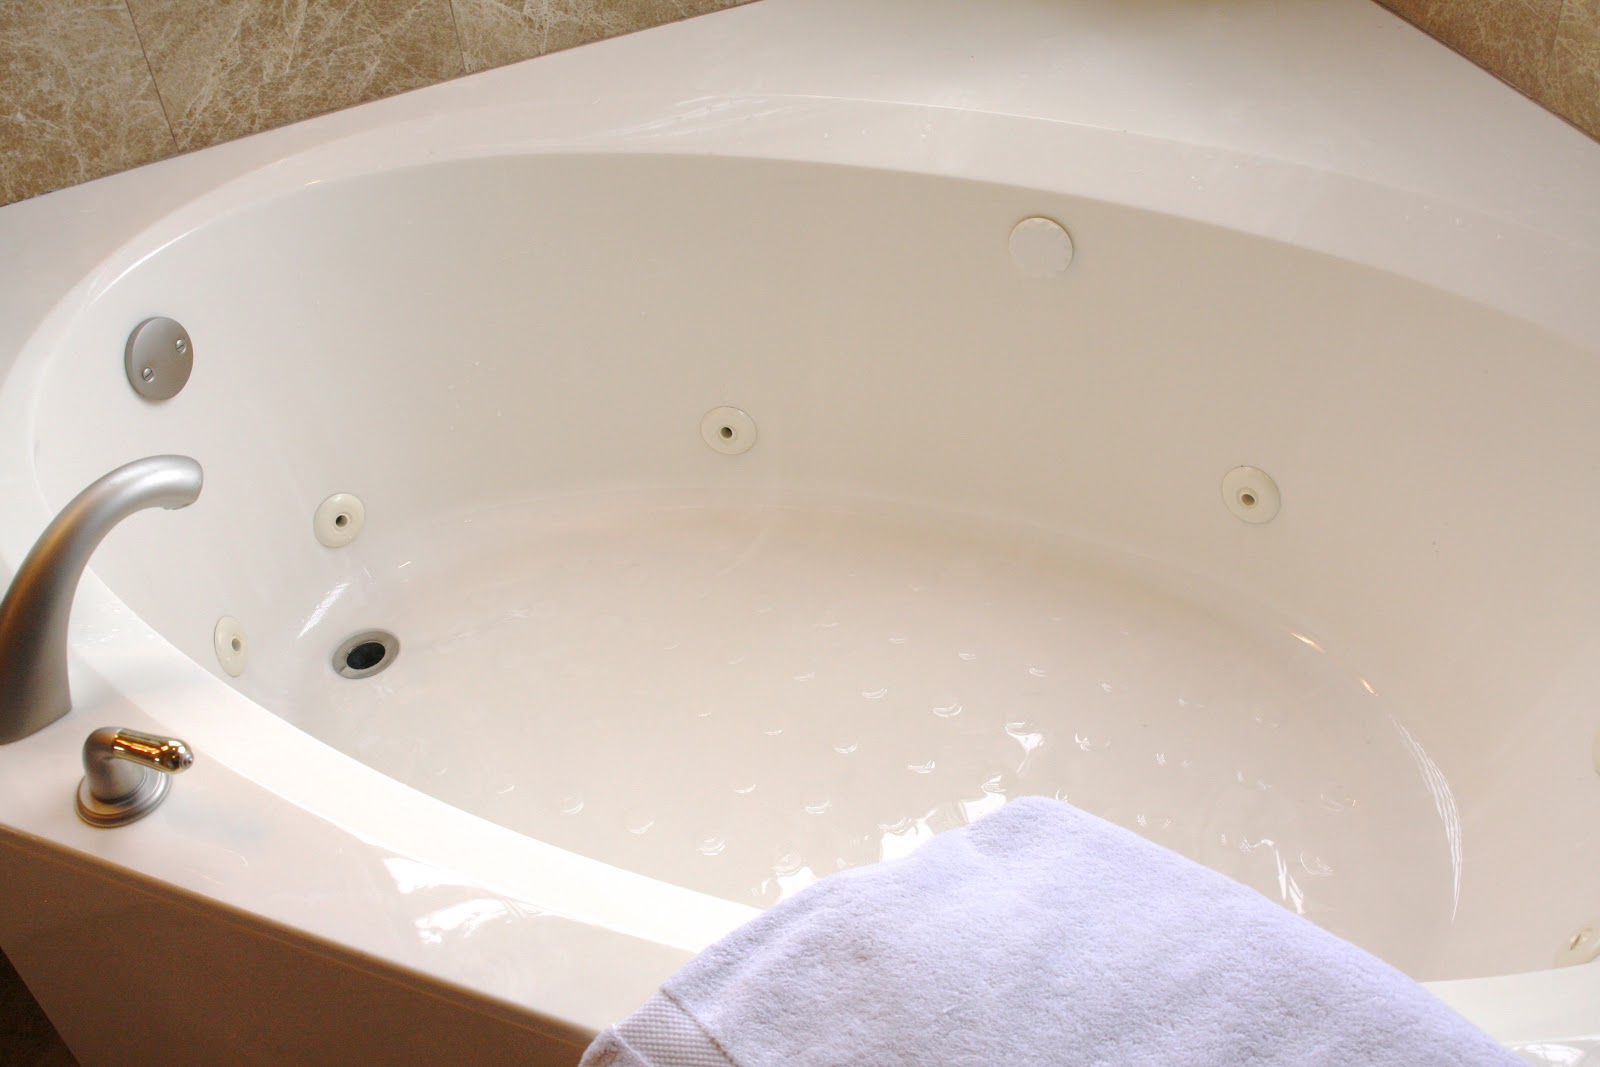 How To Clean Whirlpool Tub Jets, How To Clean Dirty Bathtub Jets